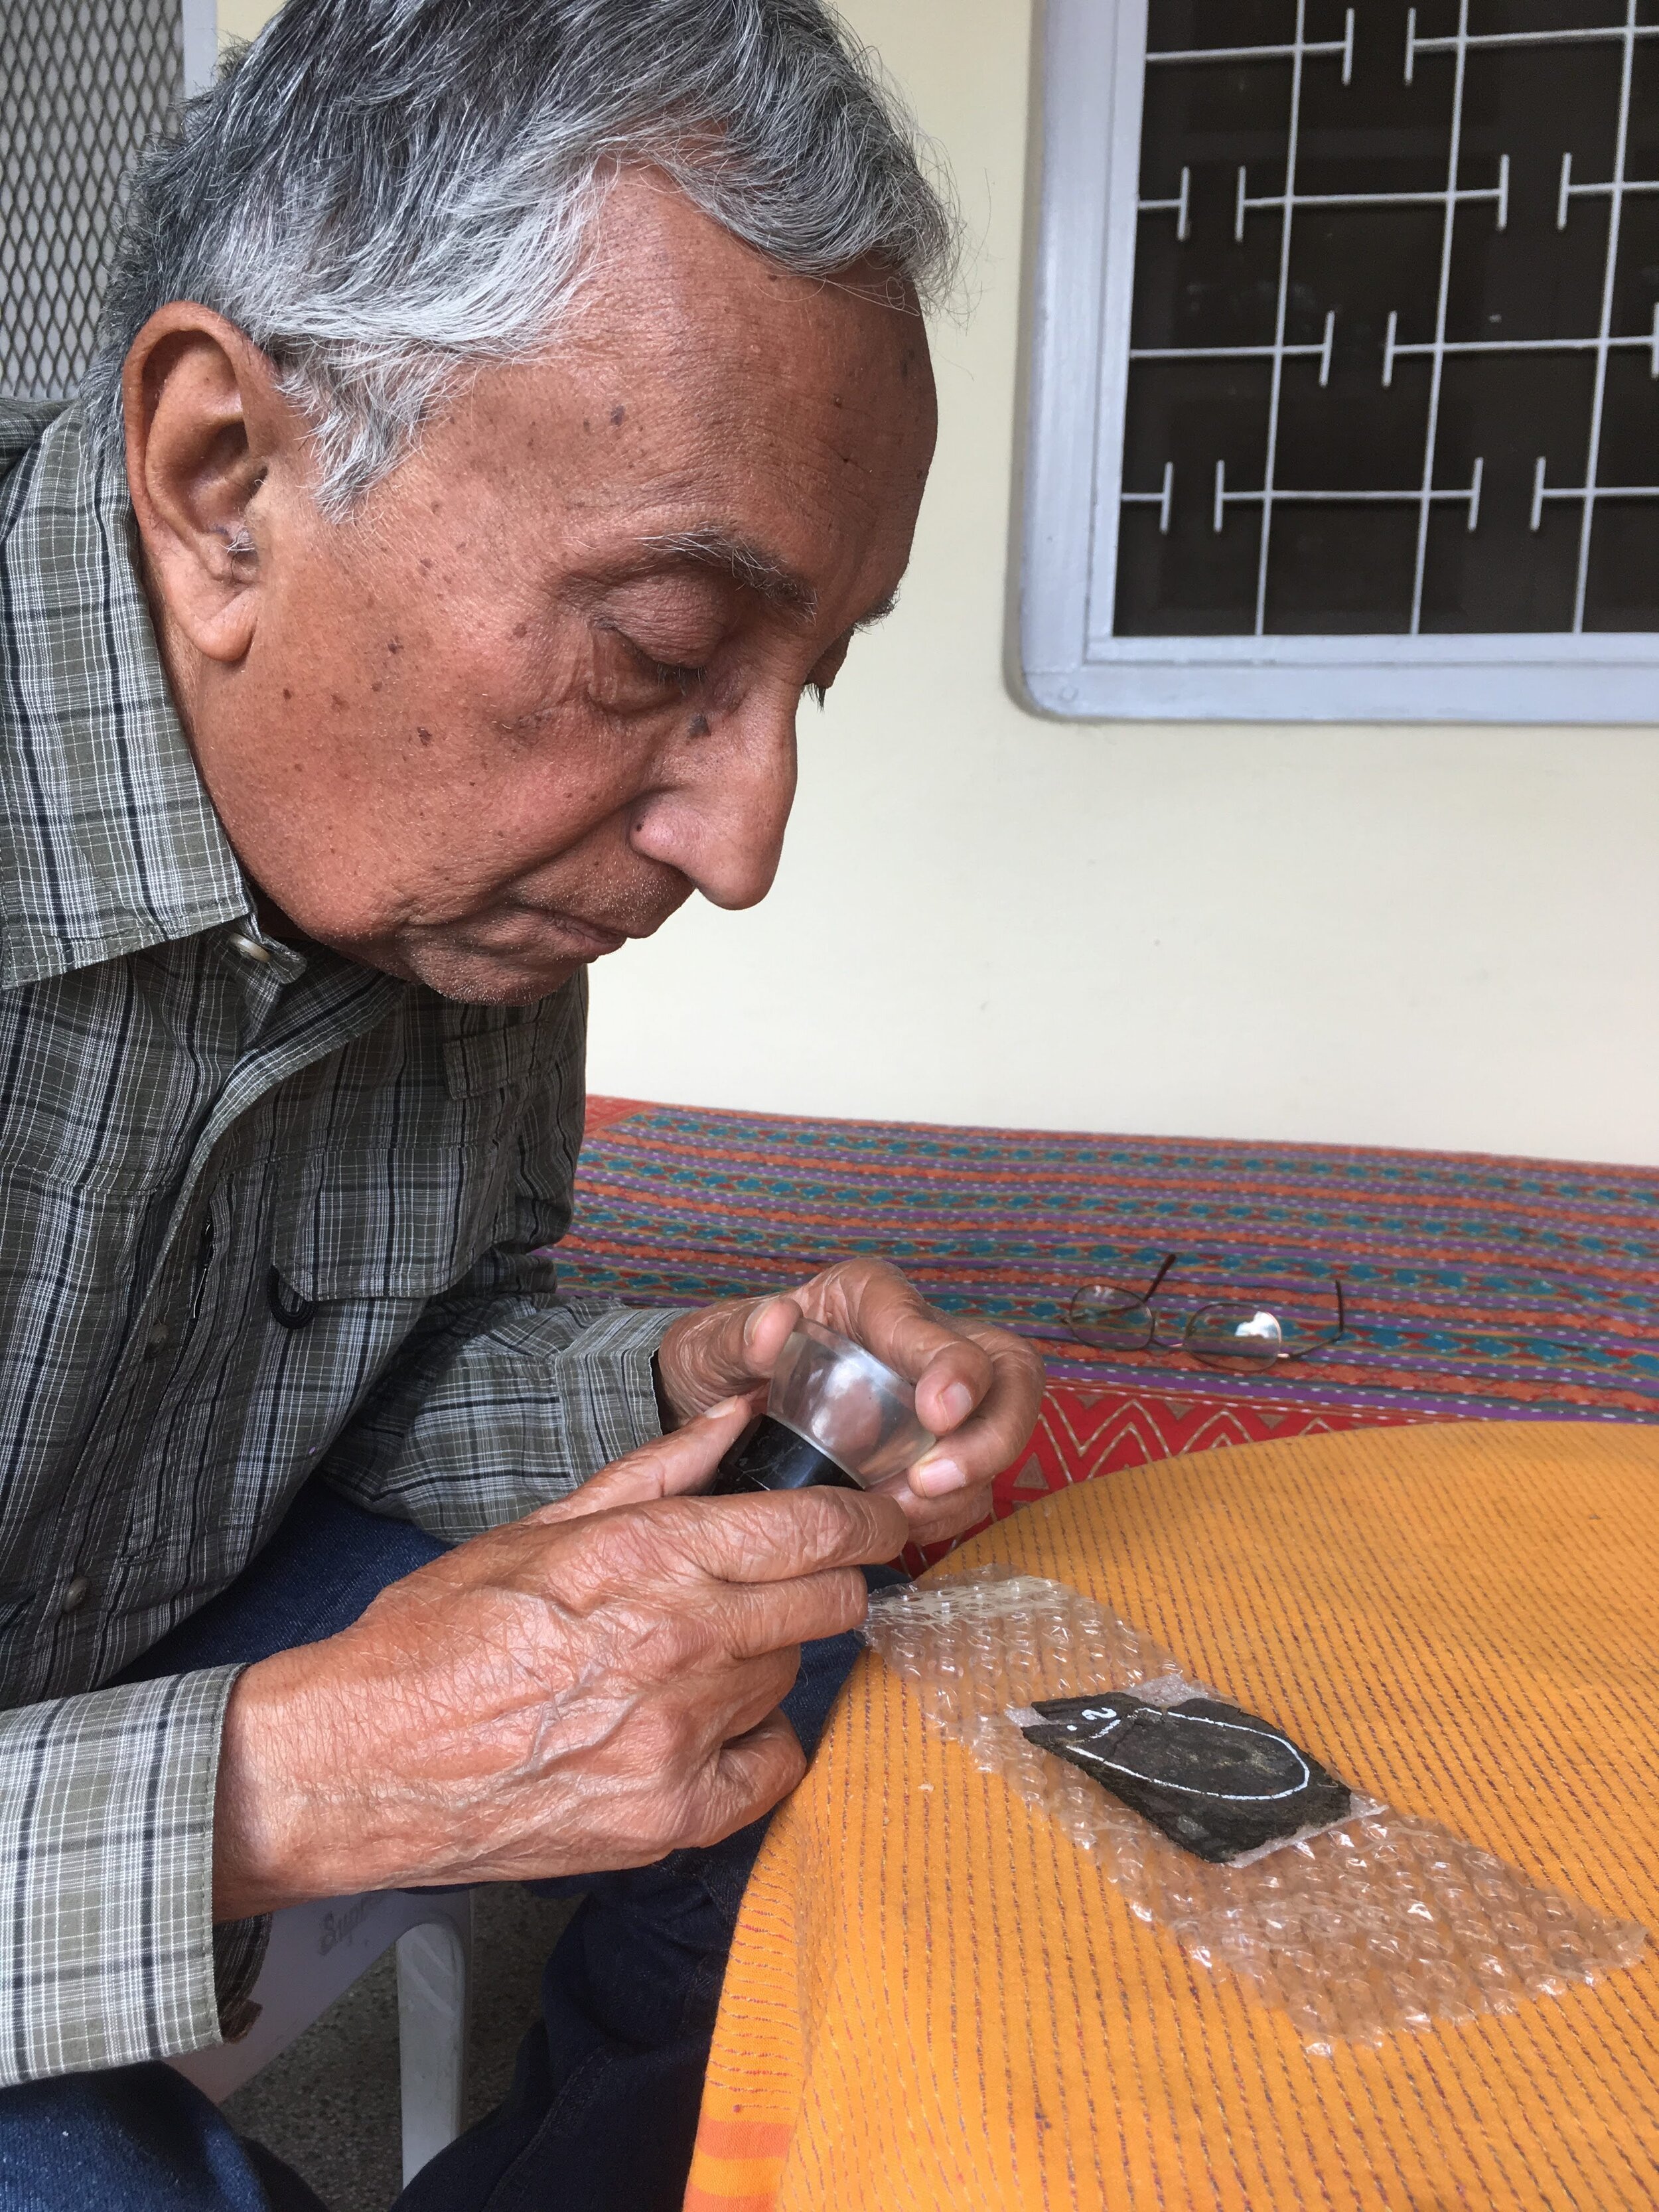 Ashok Sahni in his home in Lucknow. Ashok deduced some fossils finds from Kutch in western India to be that of whales based on a book about whale fossils in Egypt. 